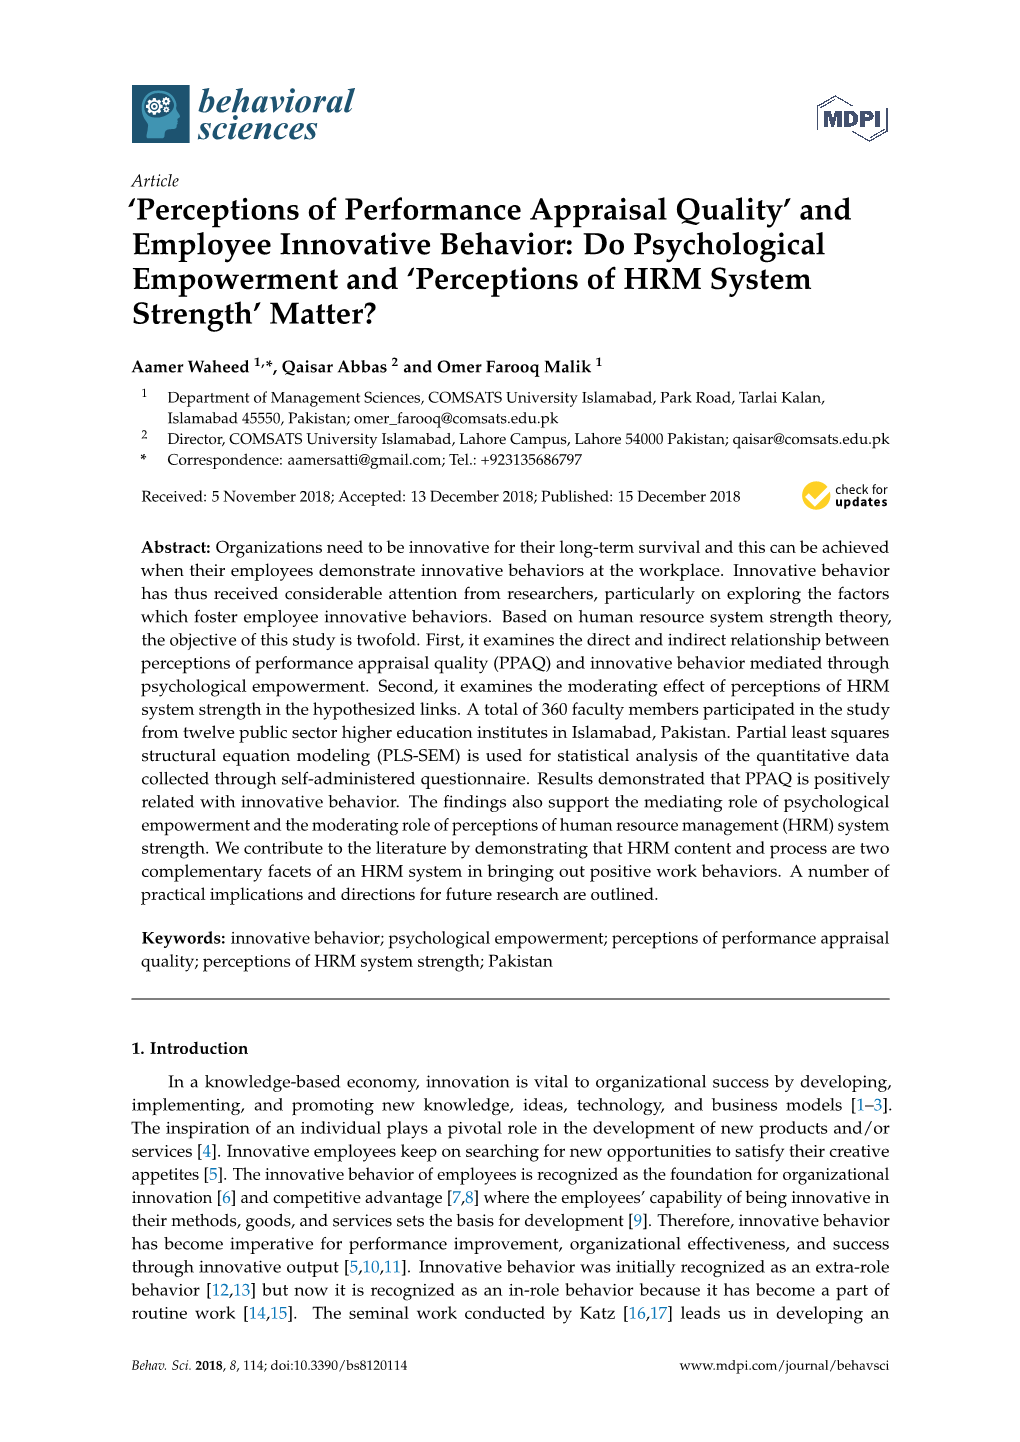 Perceptions of Performance Appraisal Quality’ and Employee Innovative Behavior: Do Psychological Empowerment and ‘Perceptions of HRM System Strength’ Matter?